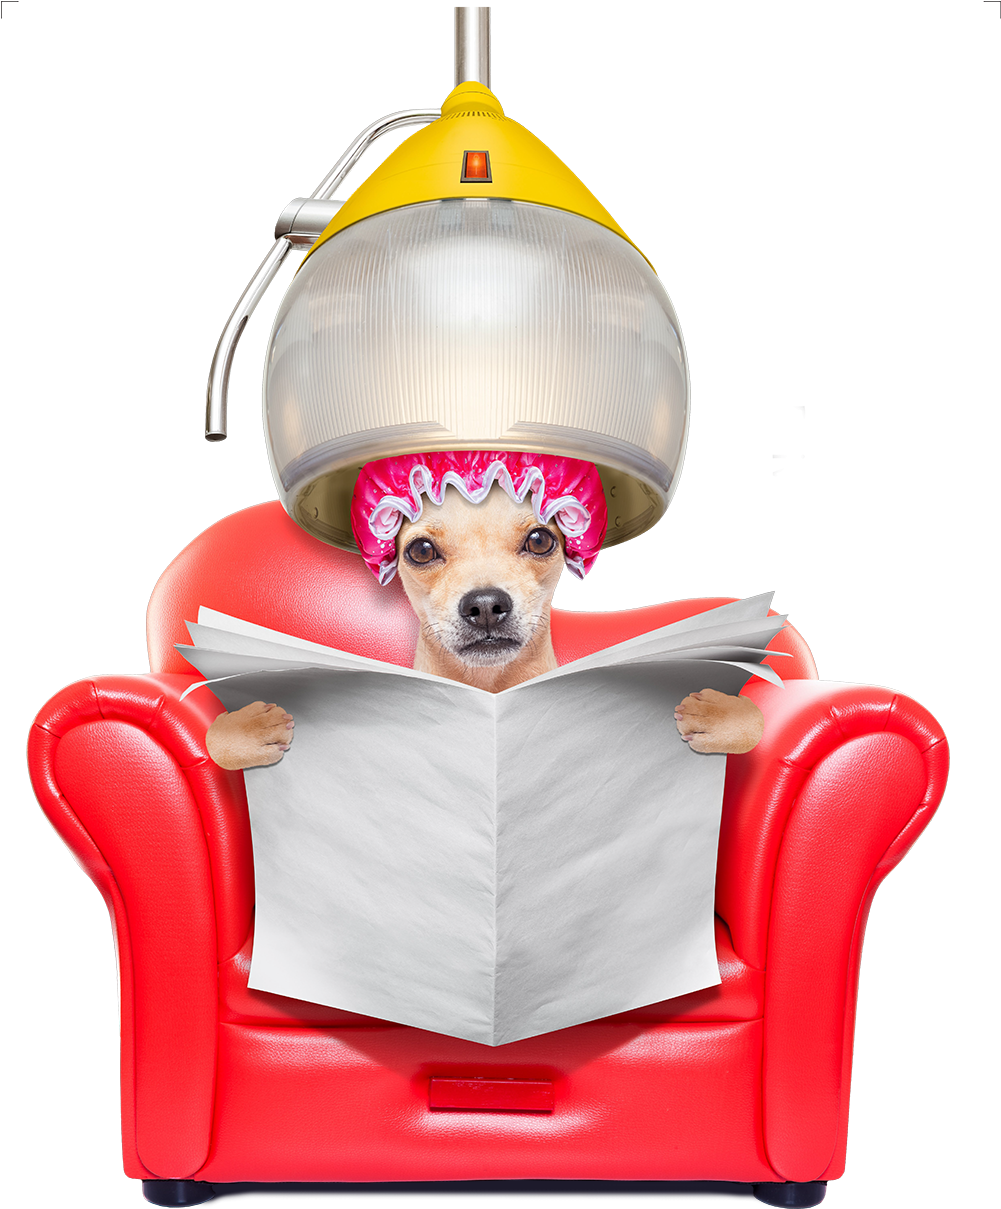 Chihuahua Dachshund Jack Russell Terrier Pug Dog Grooming - Dog In Salon Chair (1000x1249)